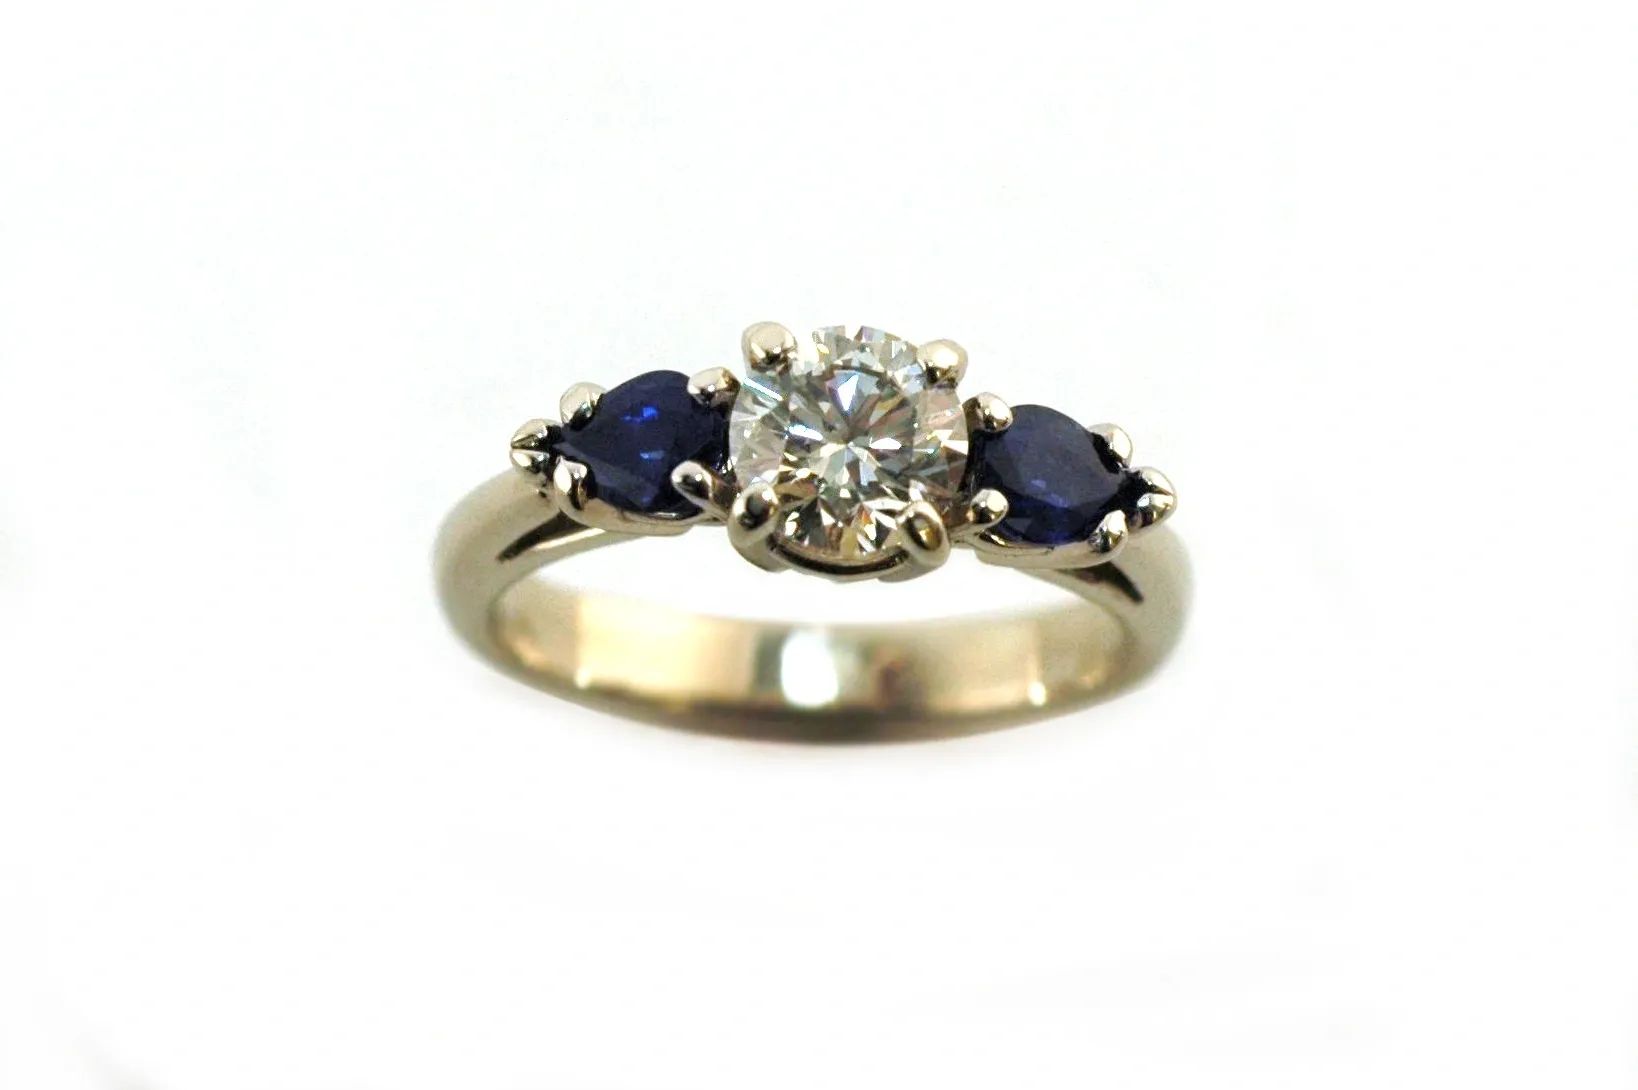 A diamond and sapphire ring is shown here.